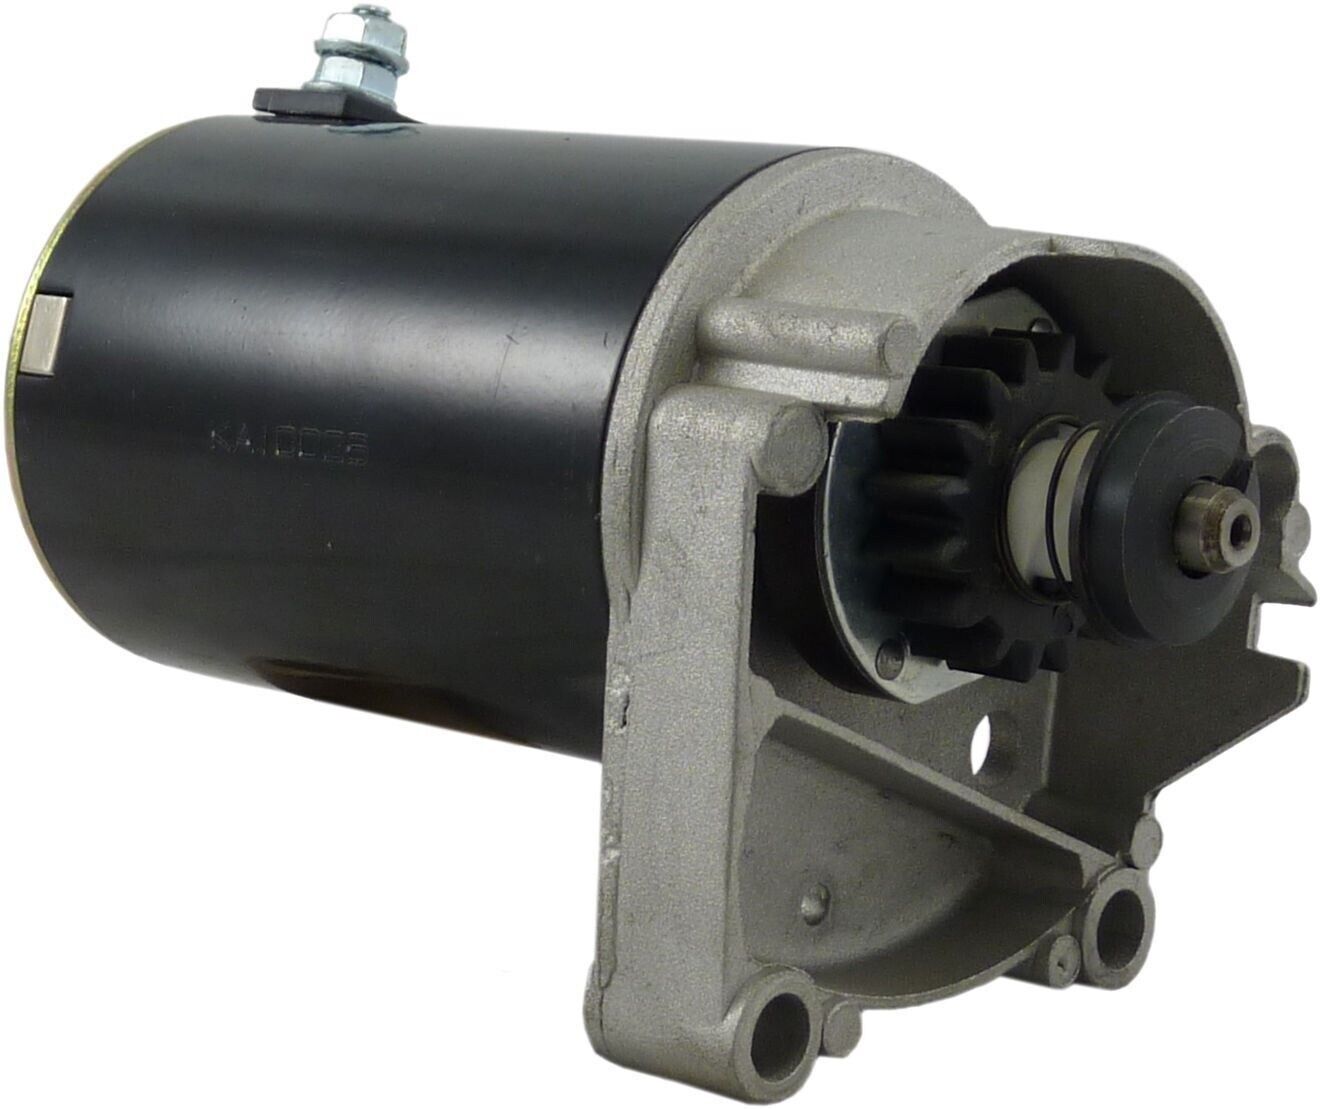 NEW PREMIUM STARTER FOR BRIGGS & STRATTON 14 16 18 HP AIR COOLED 497596 12V 16T